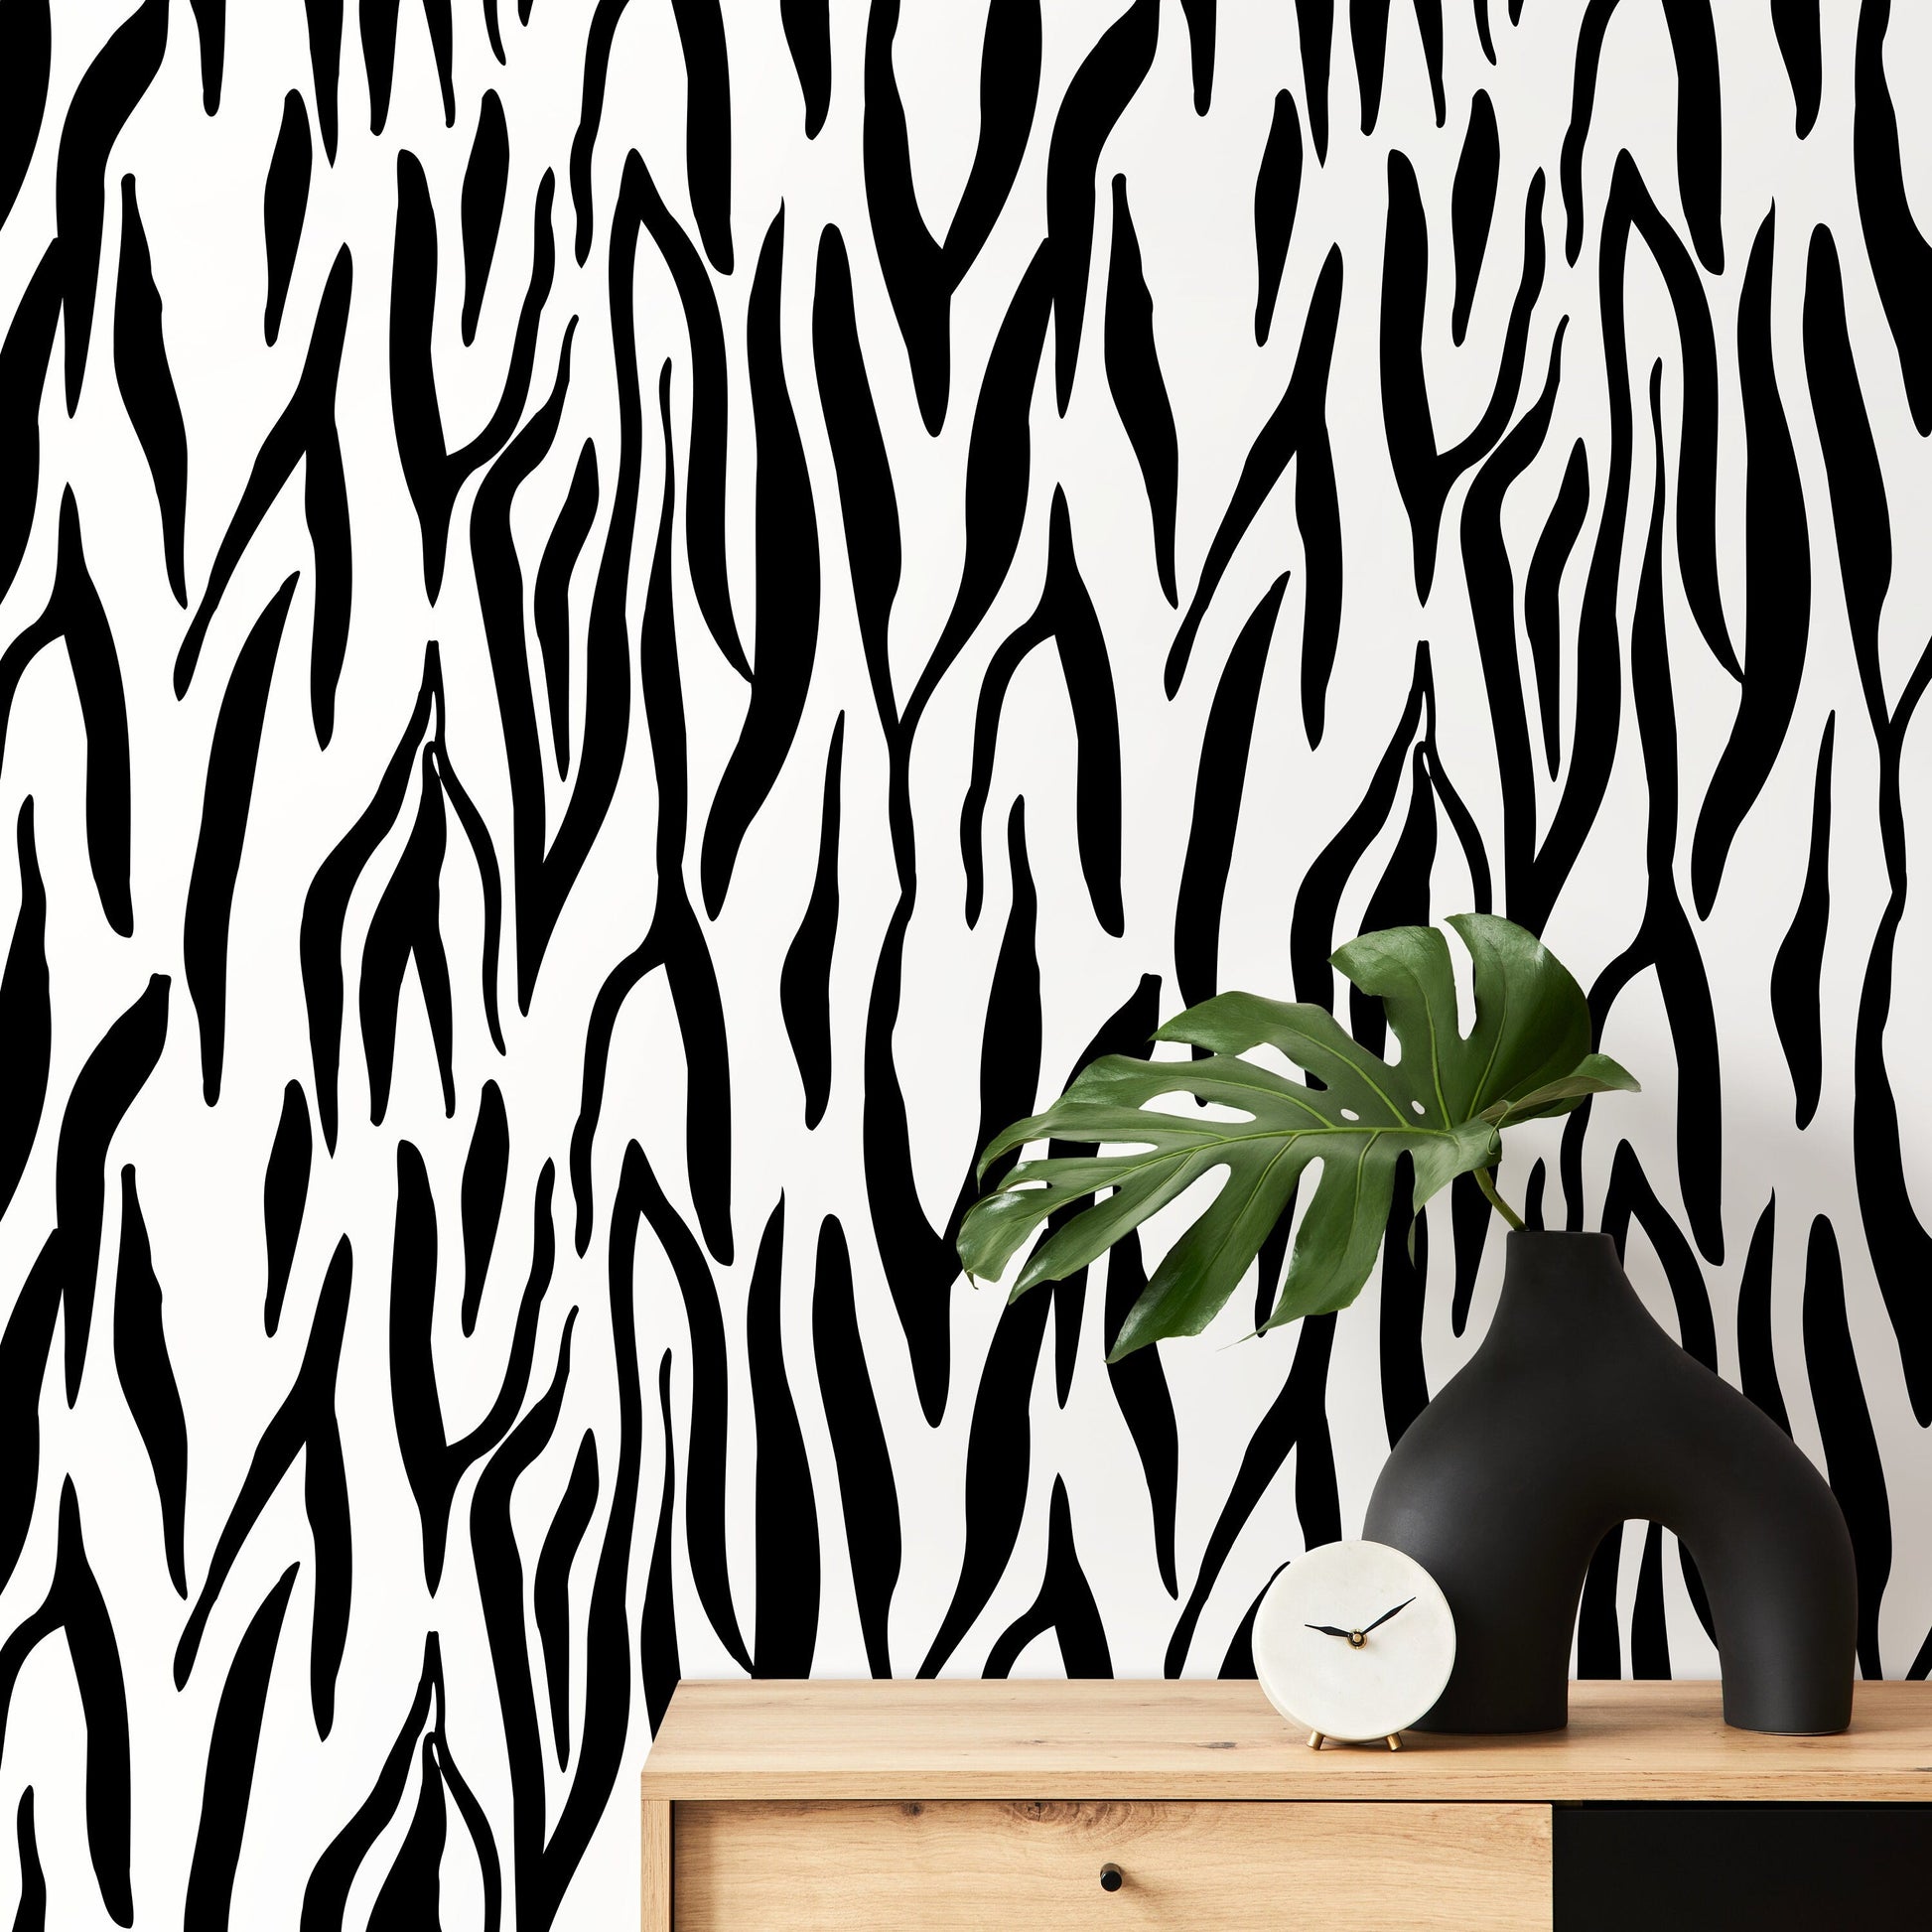 Black and White Abstract Leaf Wallpaper Modern Wallpaper Peel and Stick and Traditional Wallpaper - D607